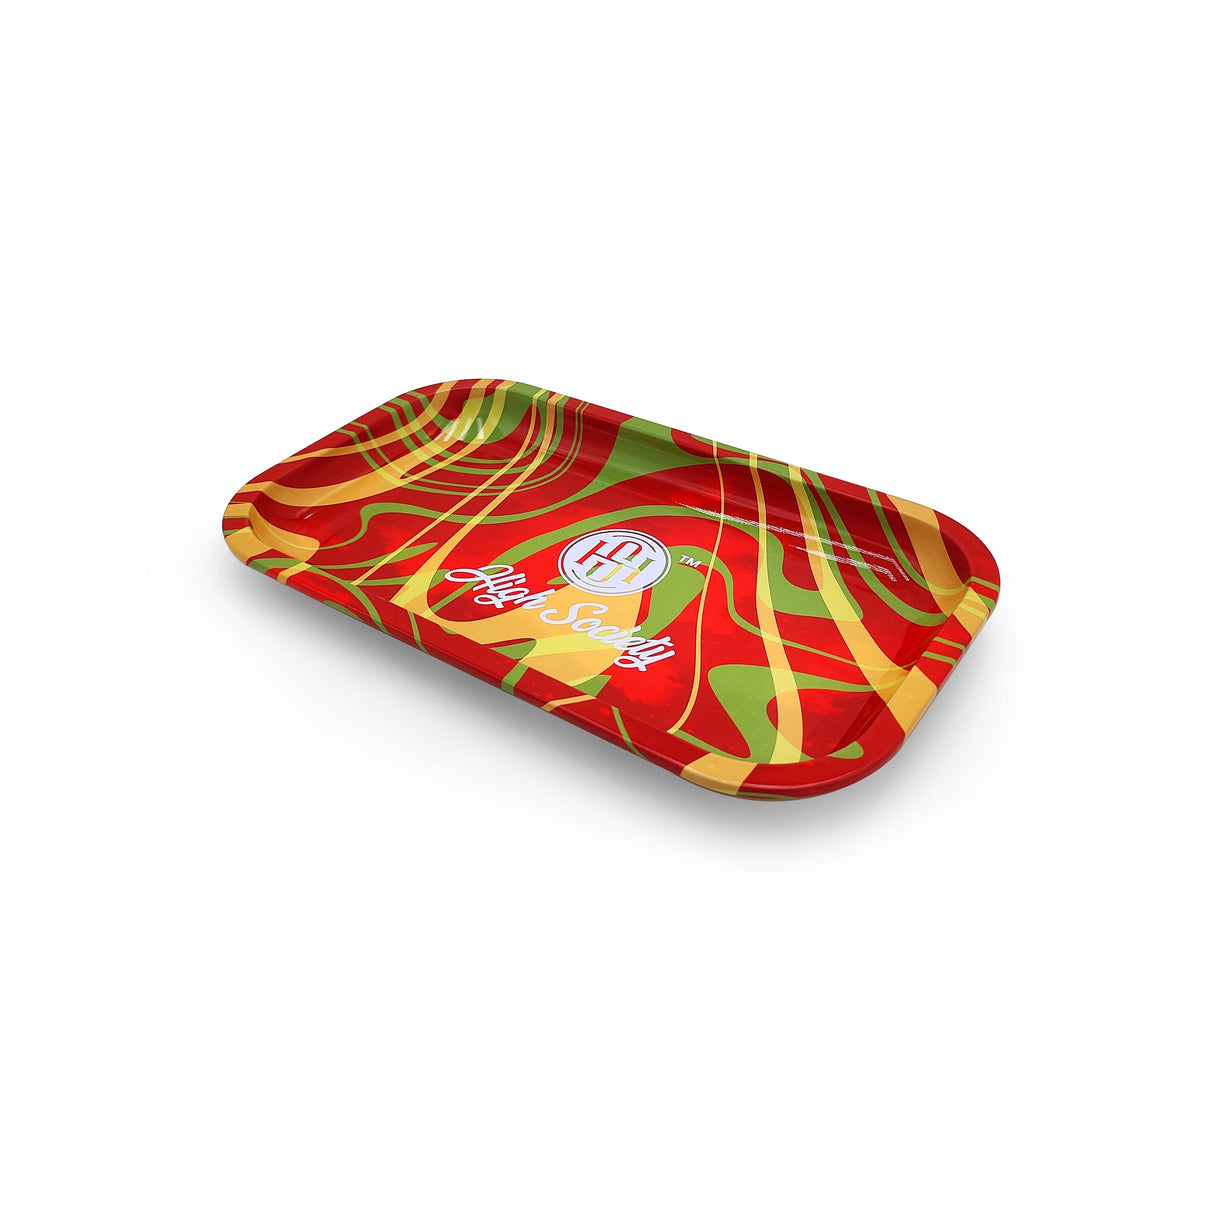 High Society Medium Rolling Tray with Rasta Design - Angled Top View